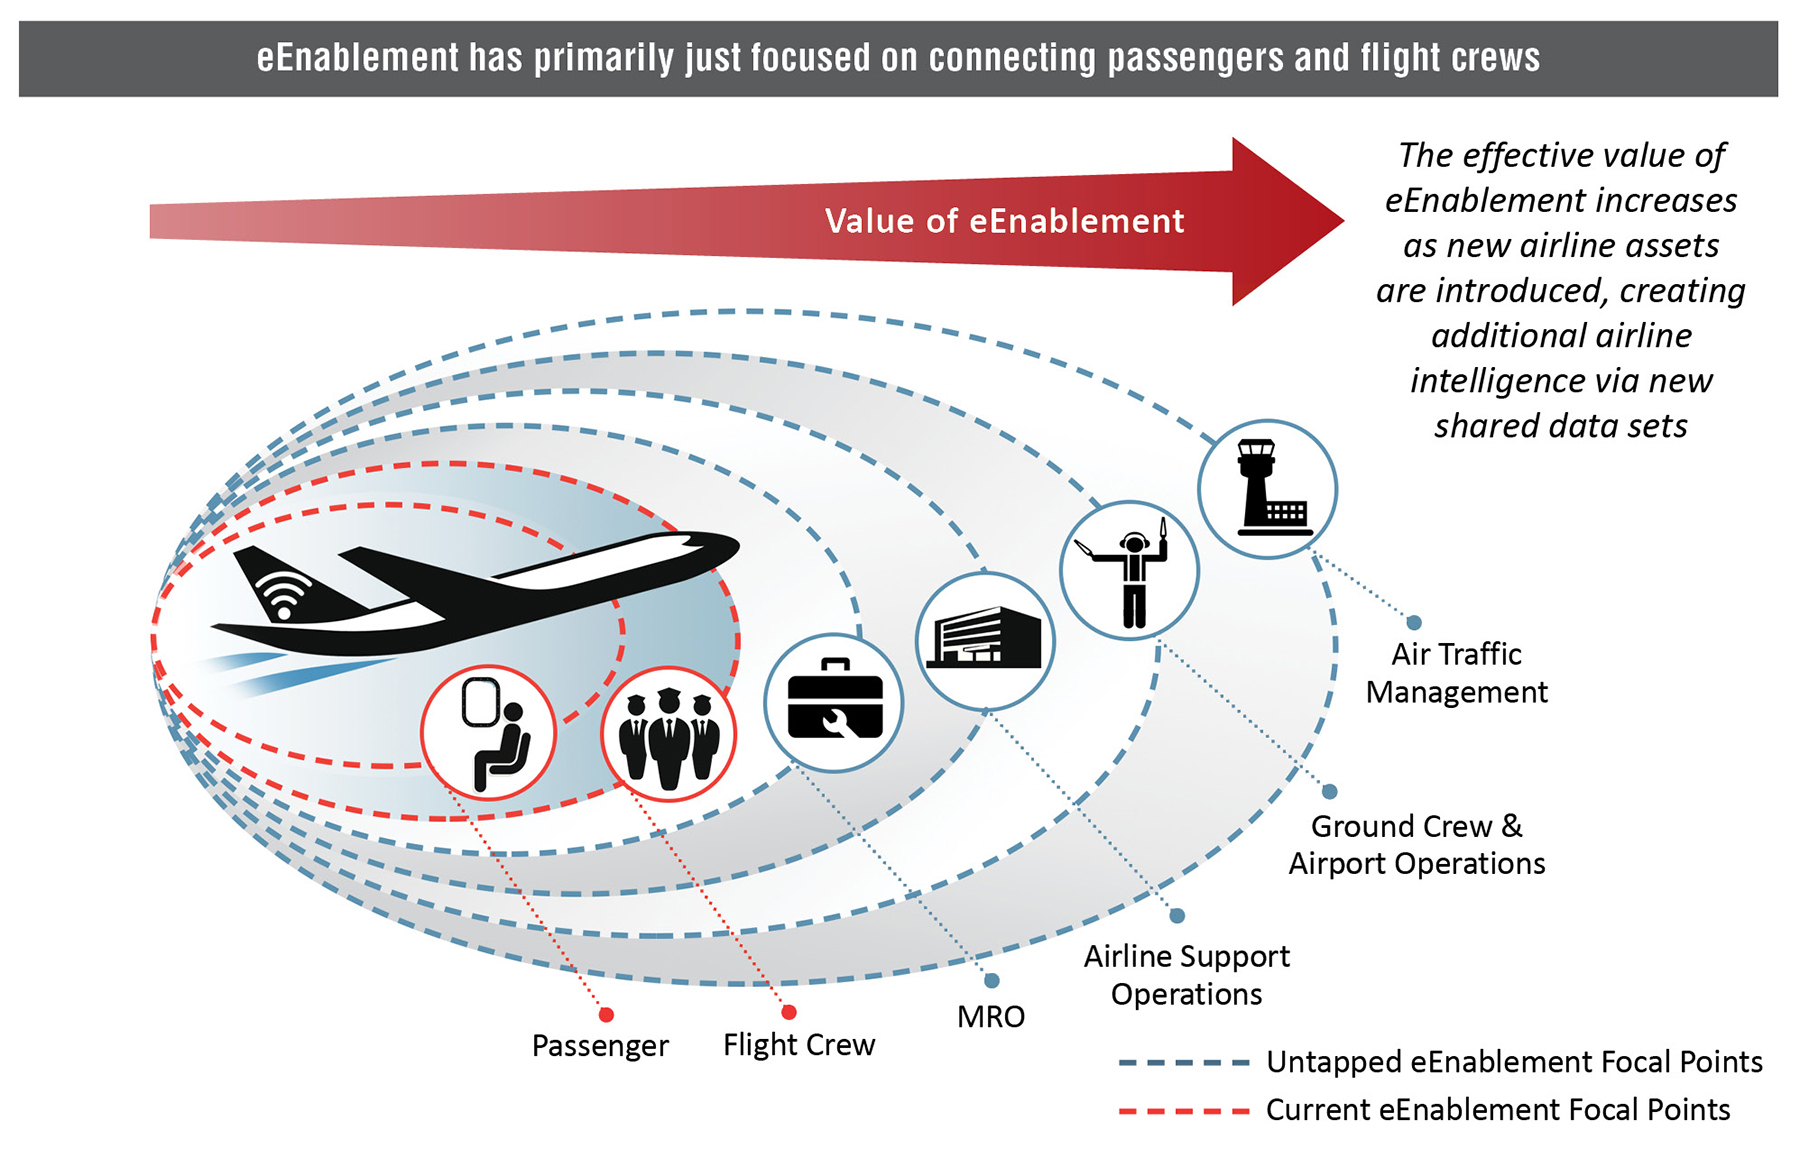 eEnablement has primarily just focused on connecting passengers and flight crews